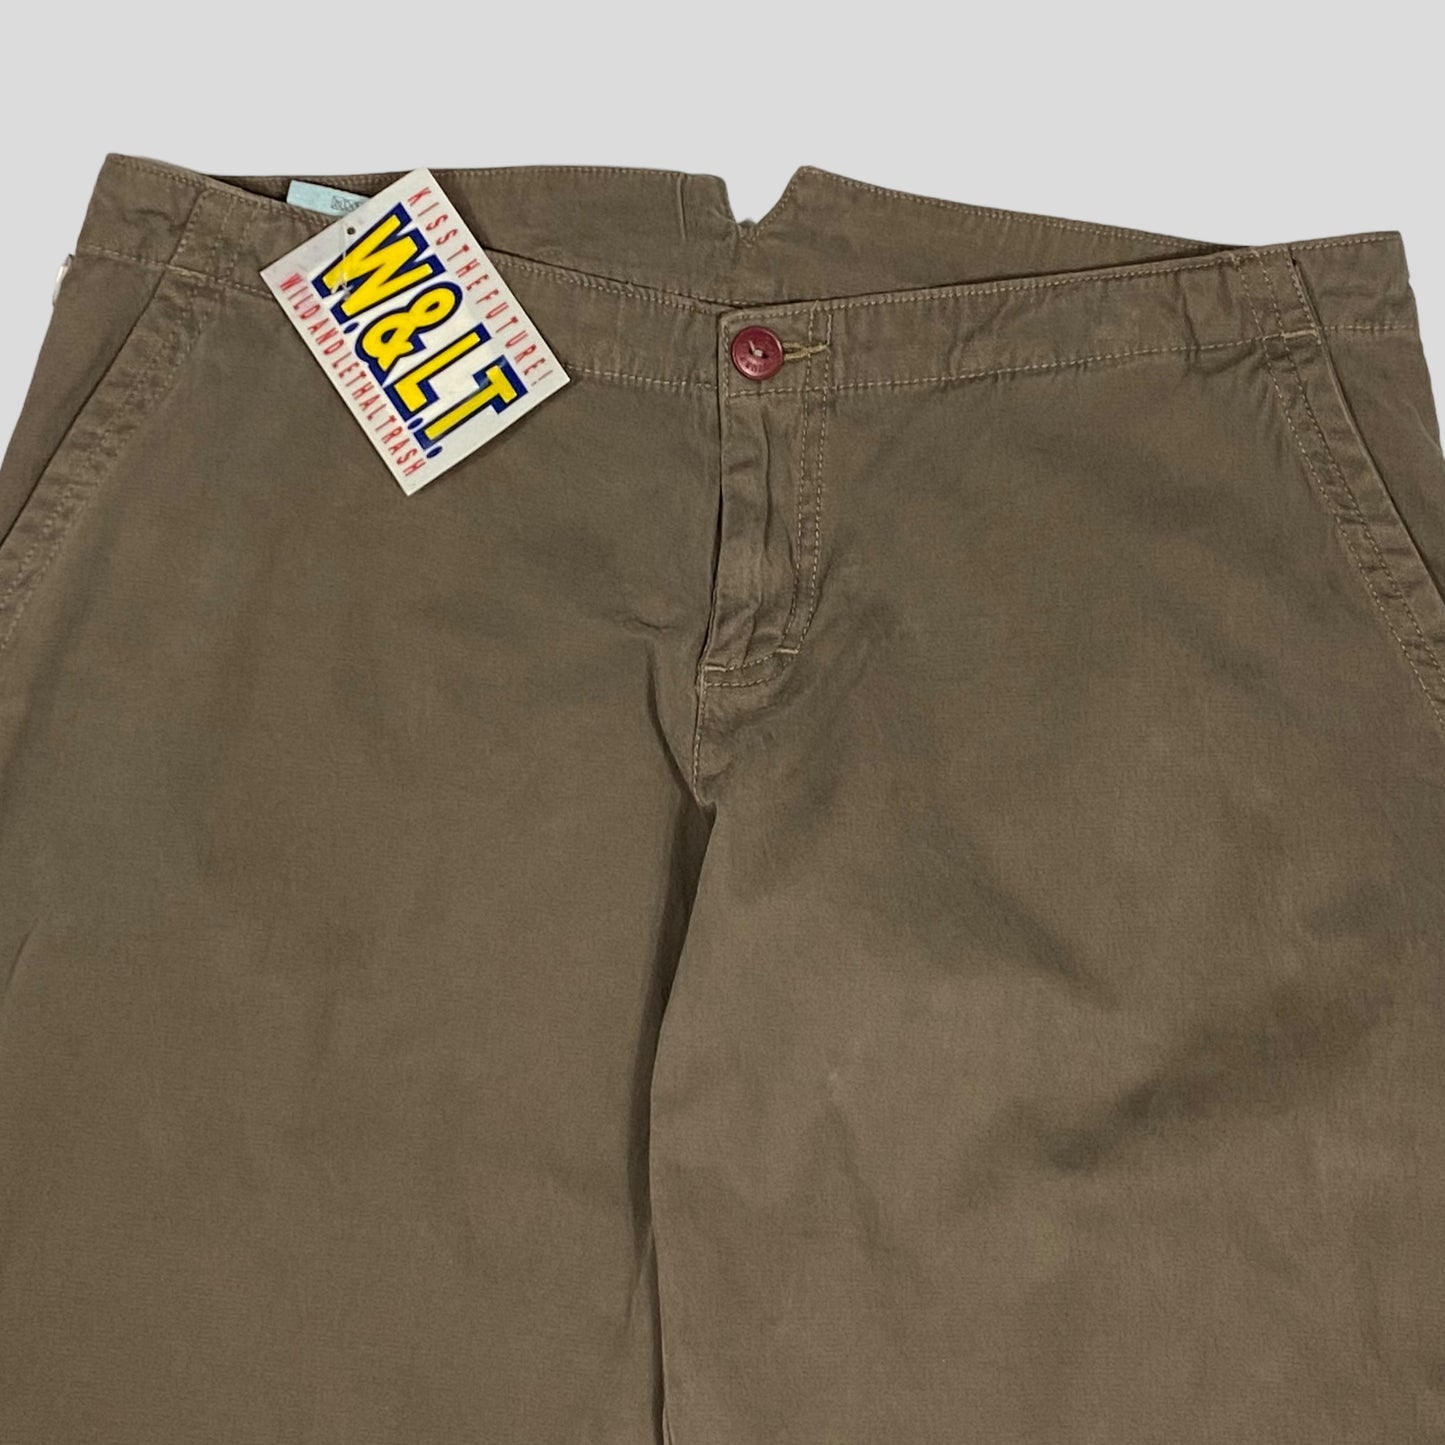 W+LT 2003 Baggy Fit Darted Trousers - 32-33